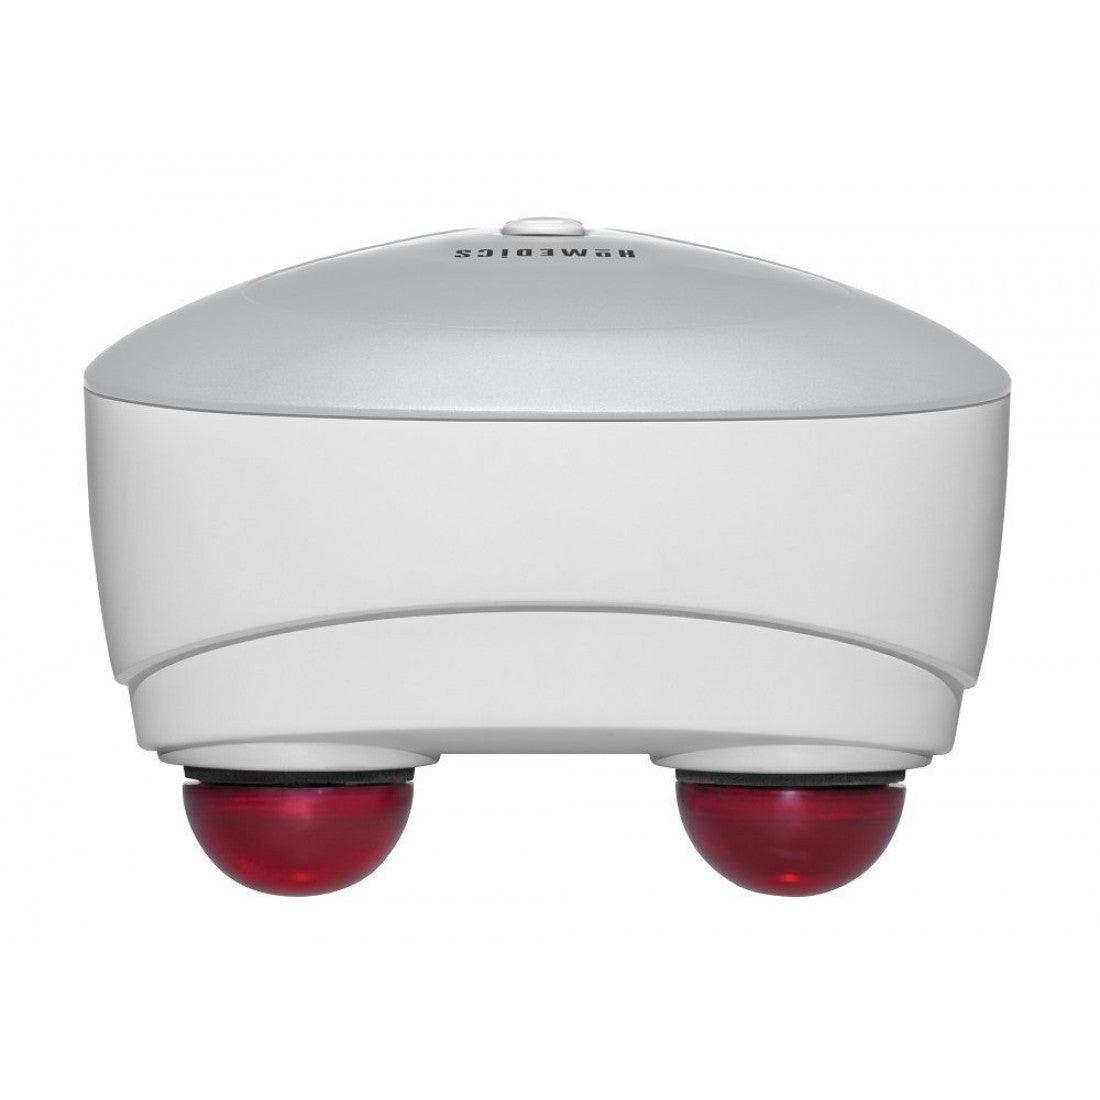 HoMedics Compact Percussion Massager with Heat - Grey &amp; White | PA-MHA-GB from DID Electrical - guaranteed Irish, guaranteed quality service. (6977547567292)